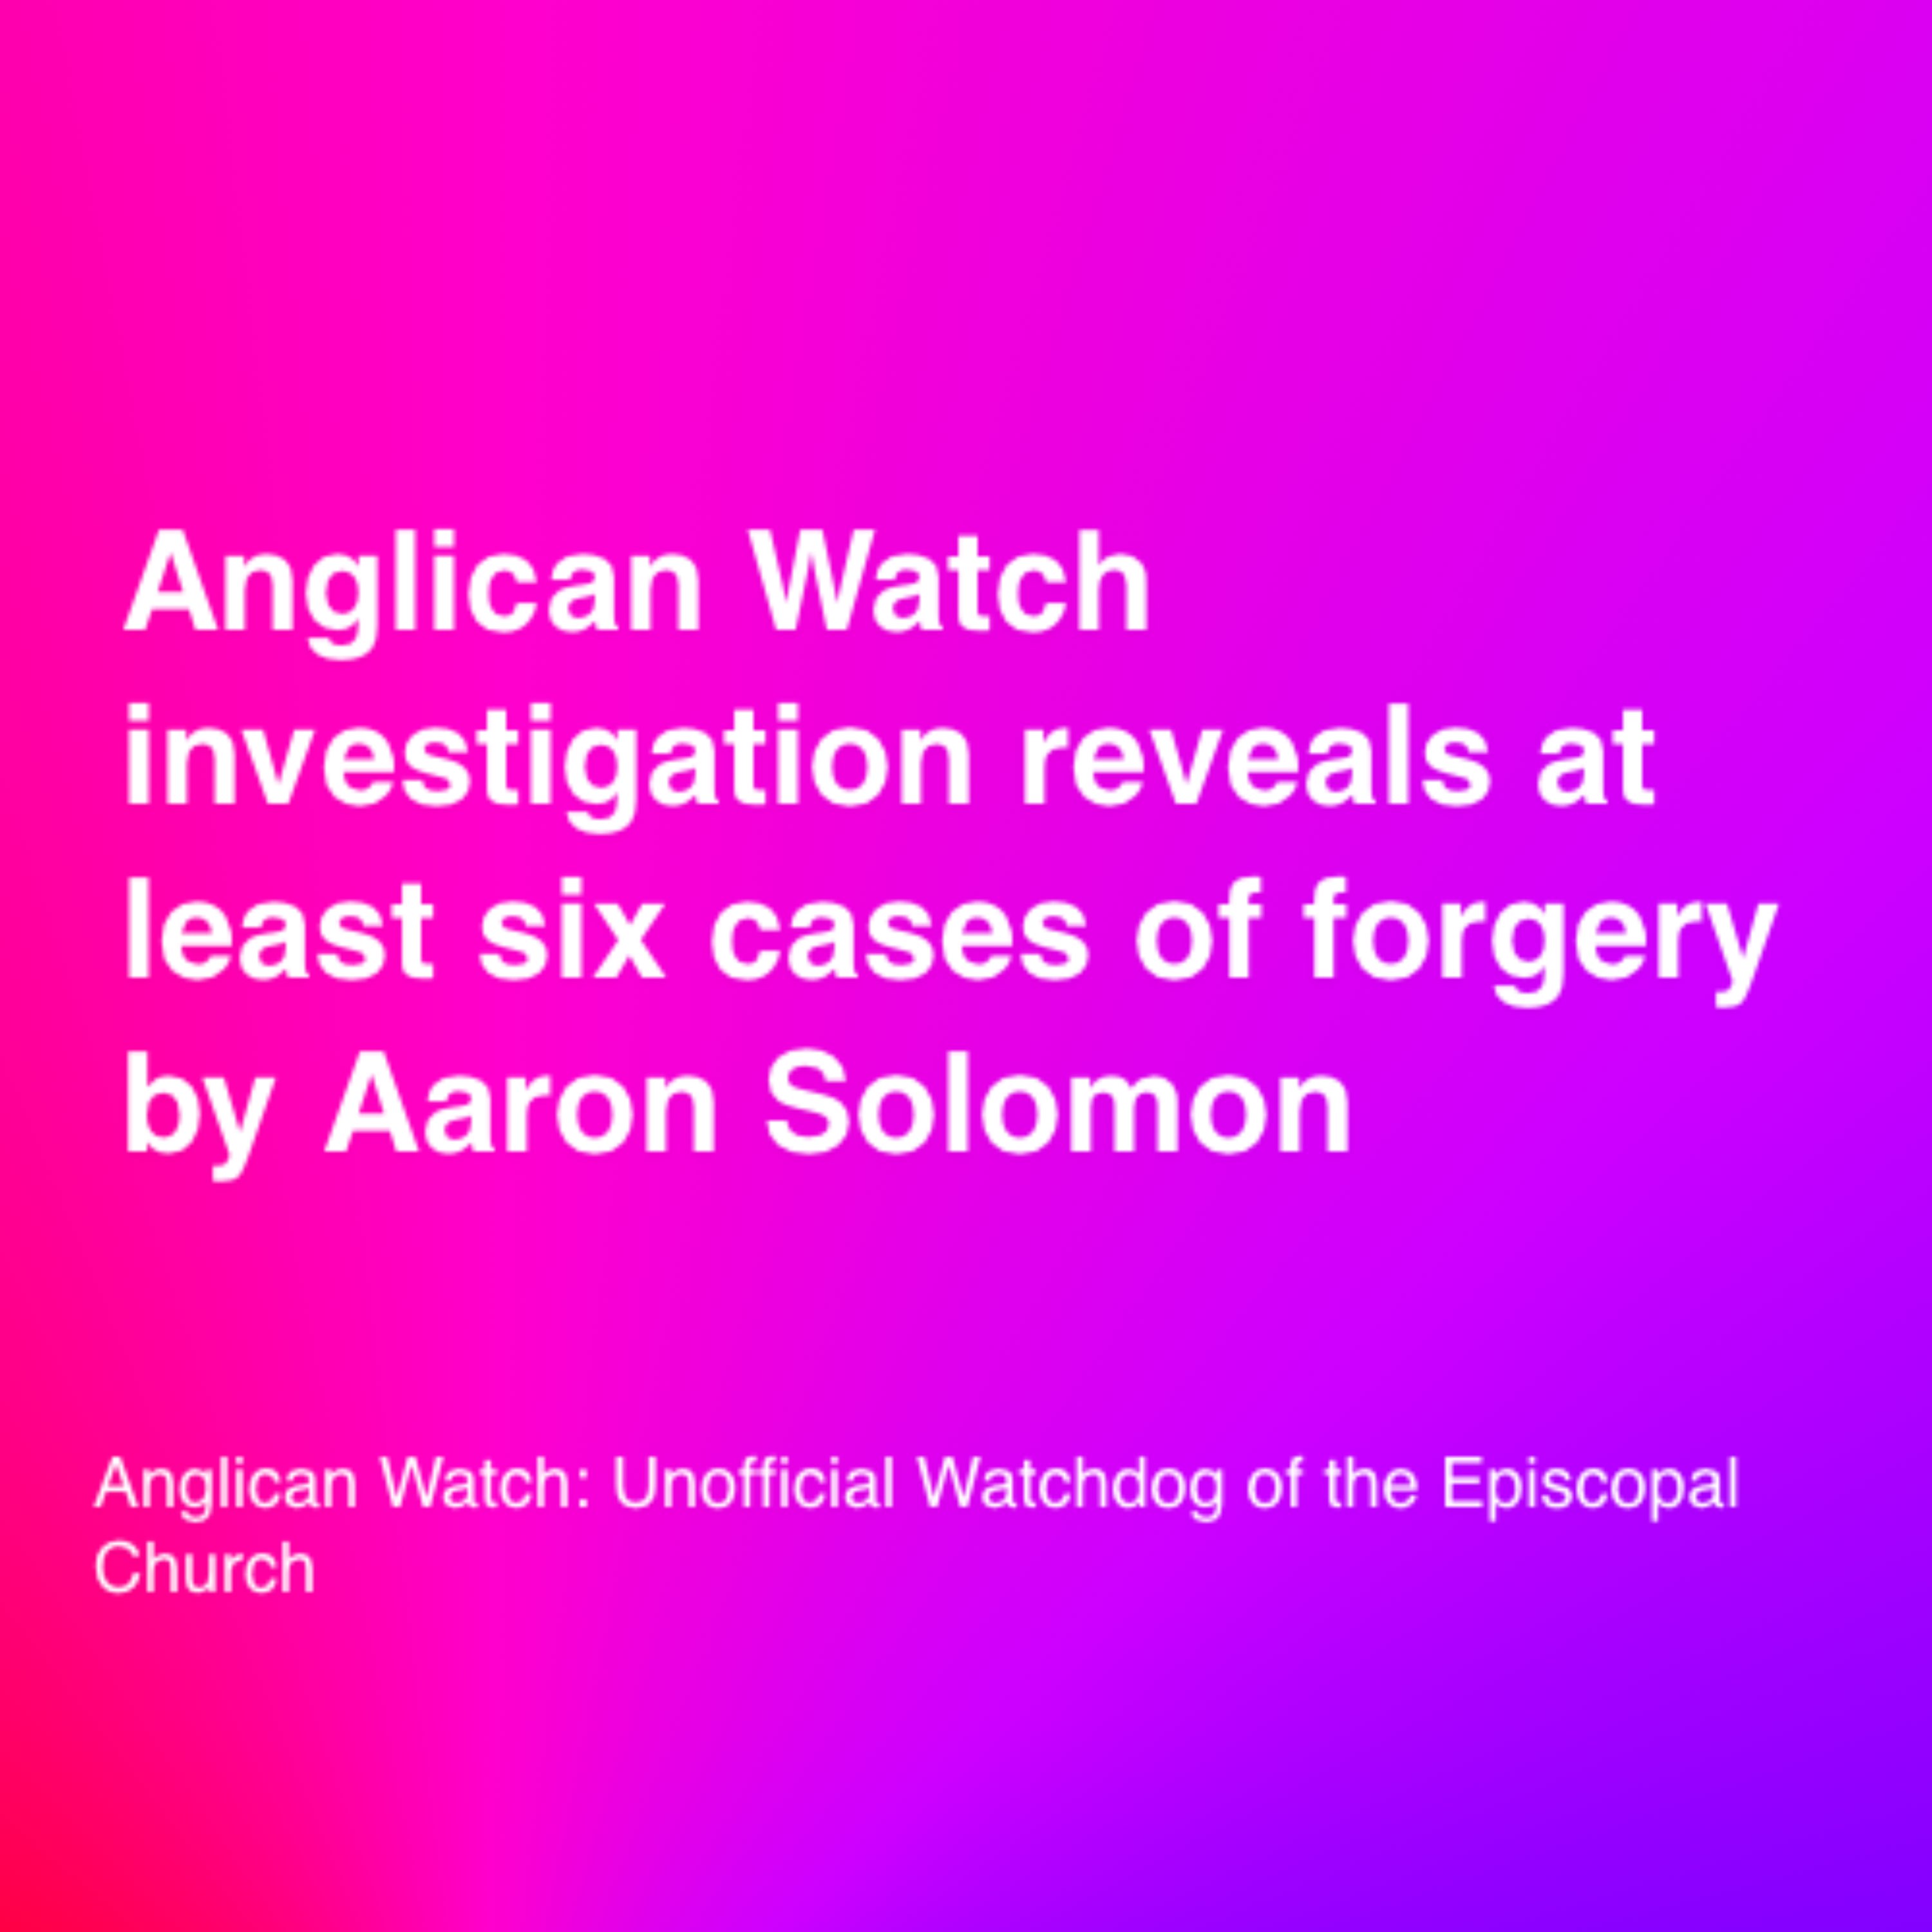 Anglican Watch investigation reveals at least six cases of forgery by Aaron Solomon